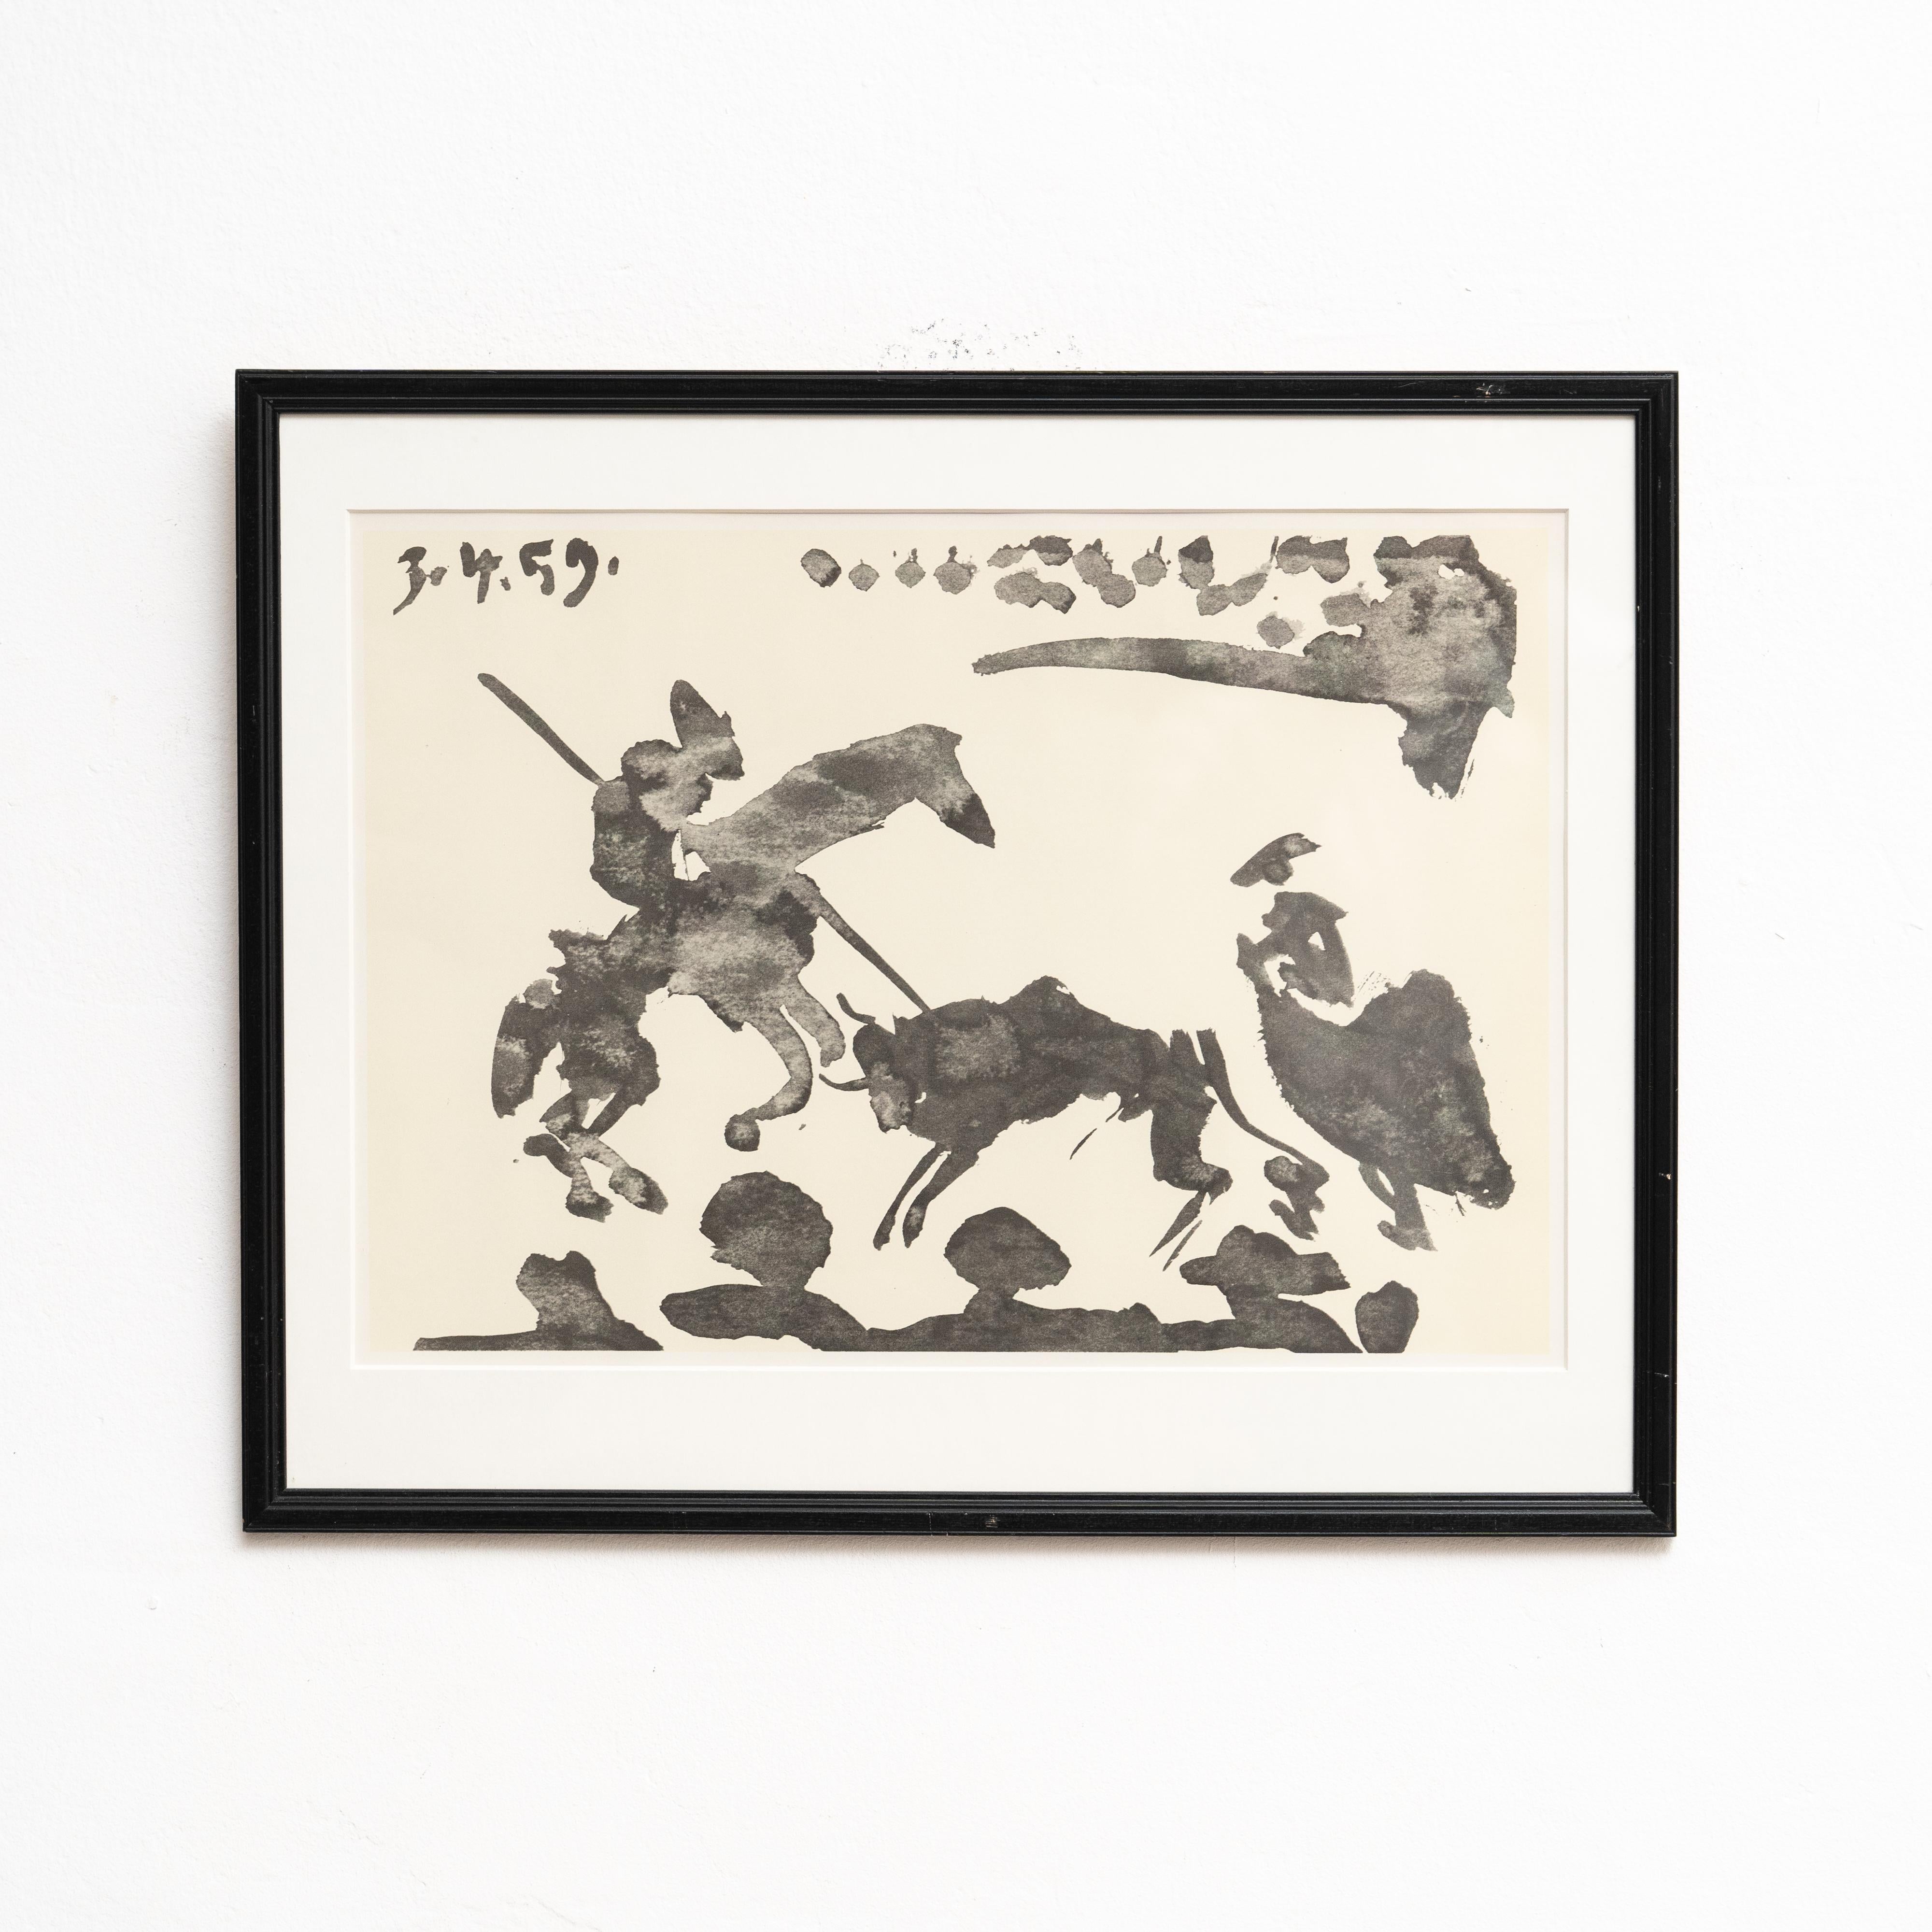 Presenting an exquisite lithographic piece by Pablo Picasso, a testament to the artist's prowess and innovation. Dated on the stone as 3.4.59, this drawing lithography captures a mesmerizing bullfighter scene in classic black and white tones, framed